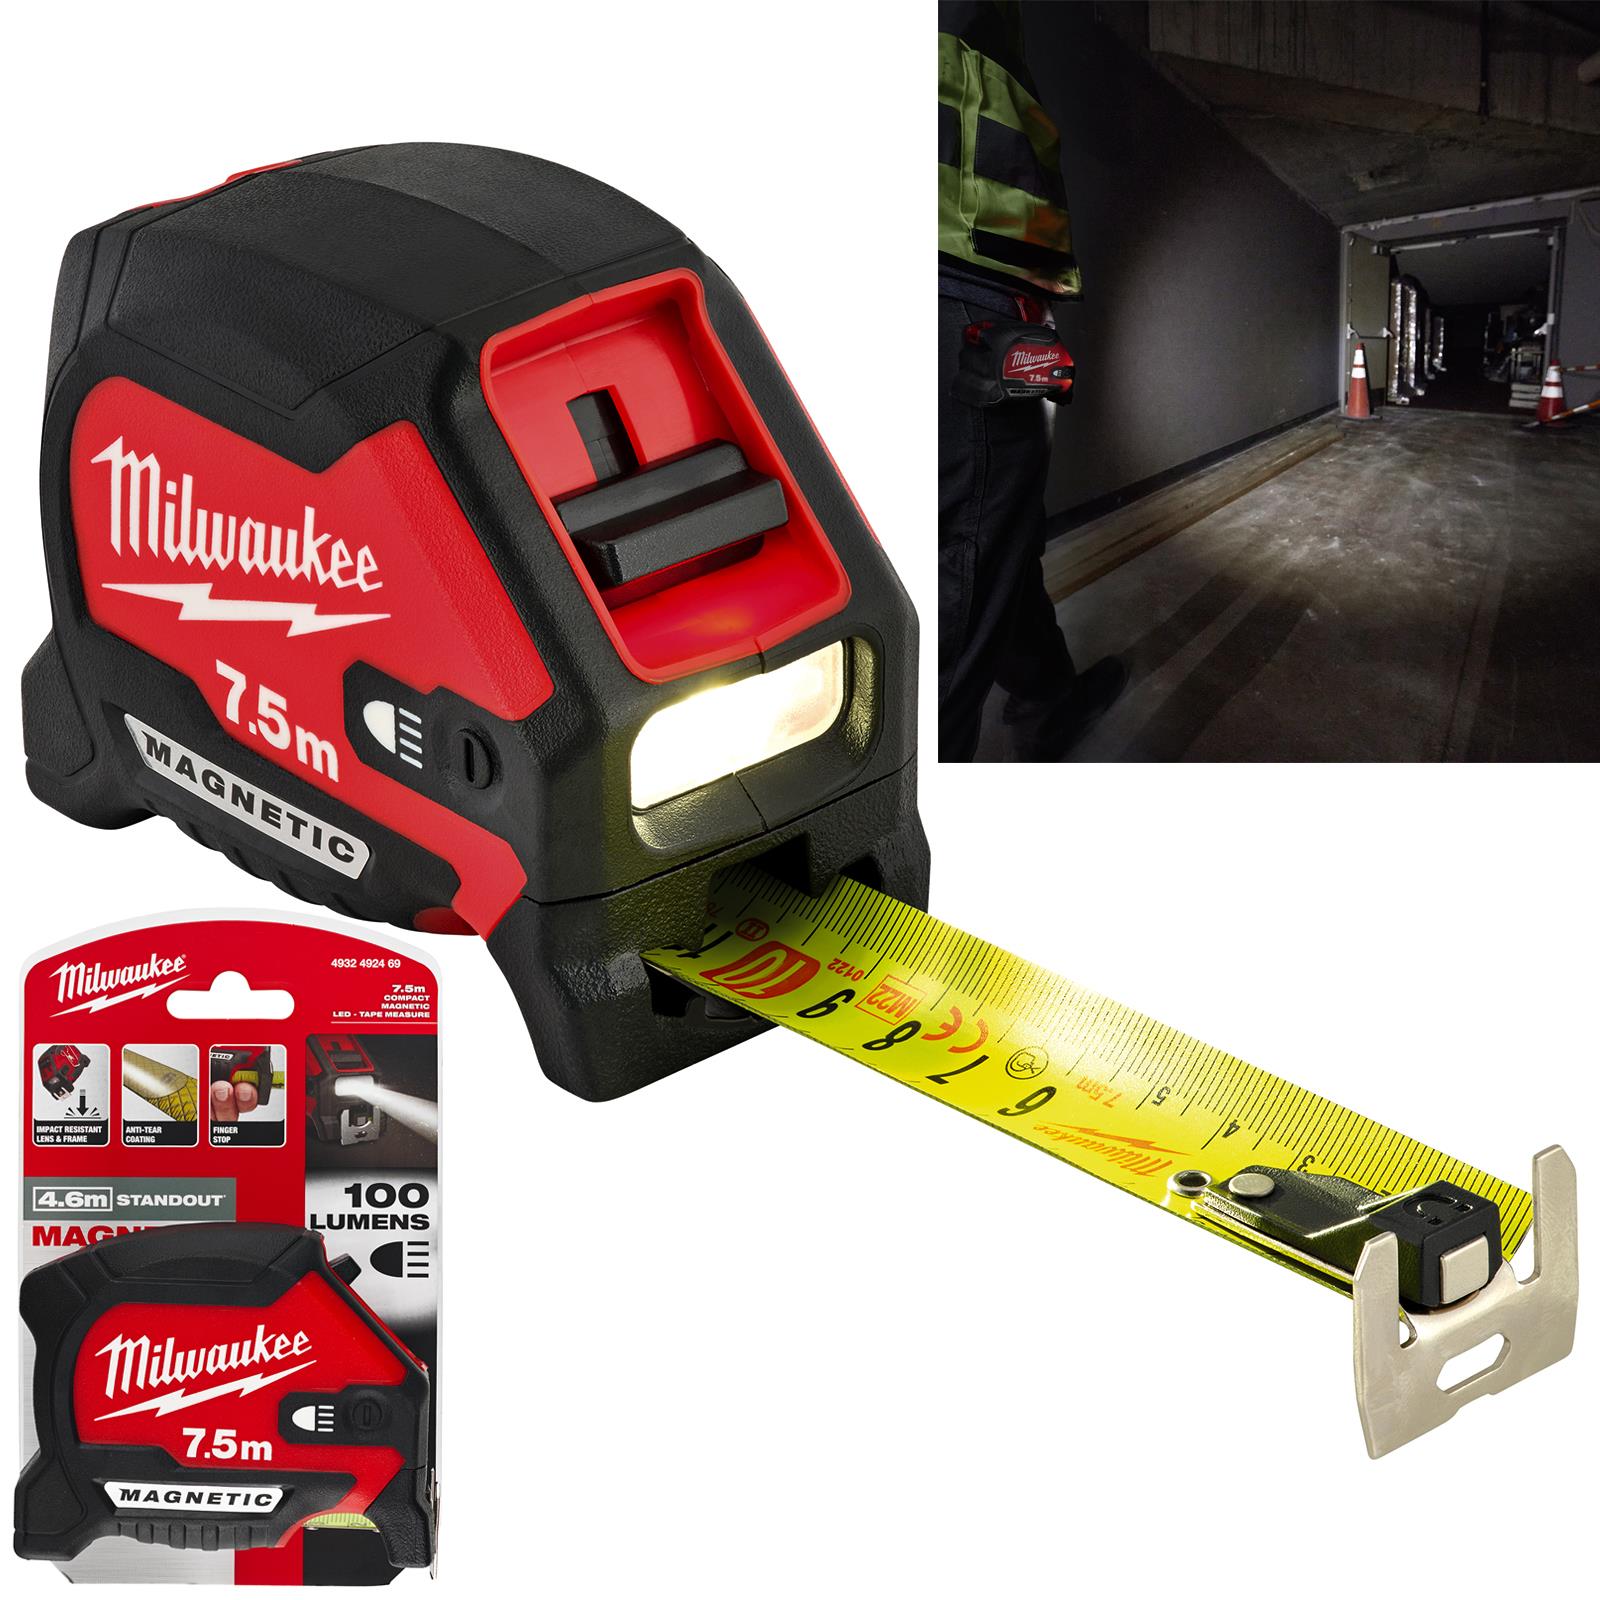 Milwaukee Tape Measure Magnetic 7.5m with LED Light 30mm Wide Blade 100 Lumens